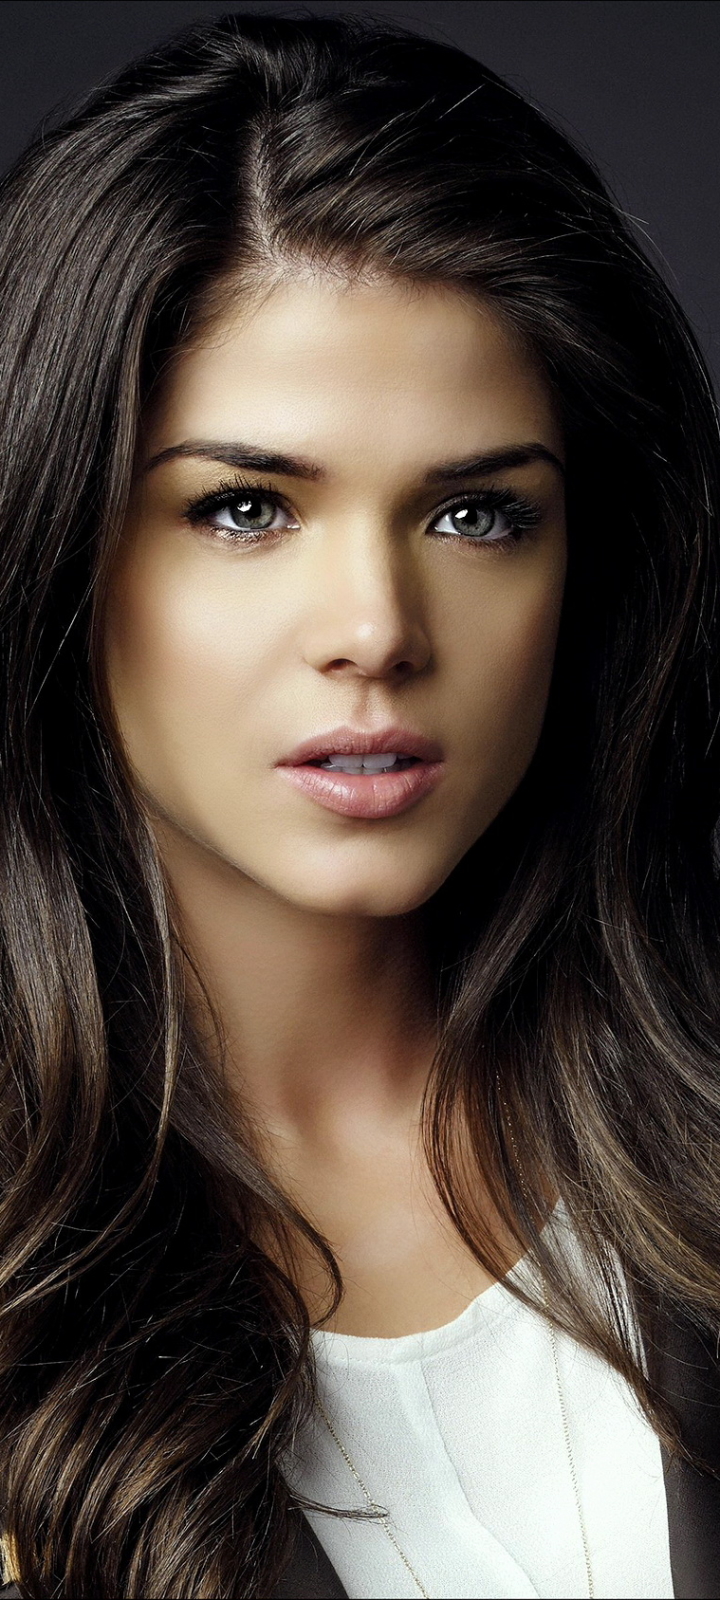 celebrity, marie avgeropoulos, face, model, black hair